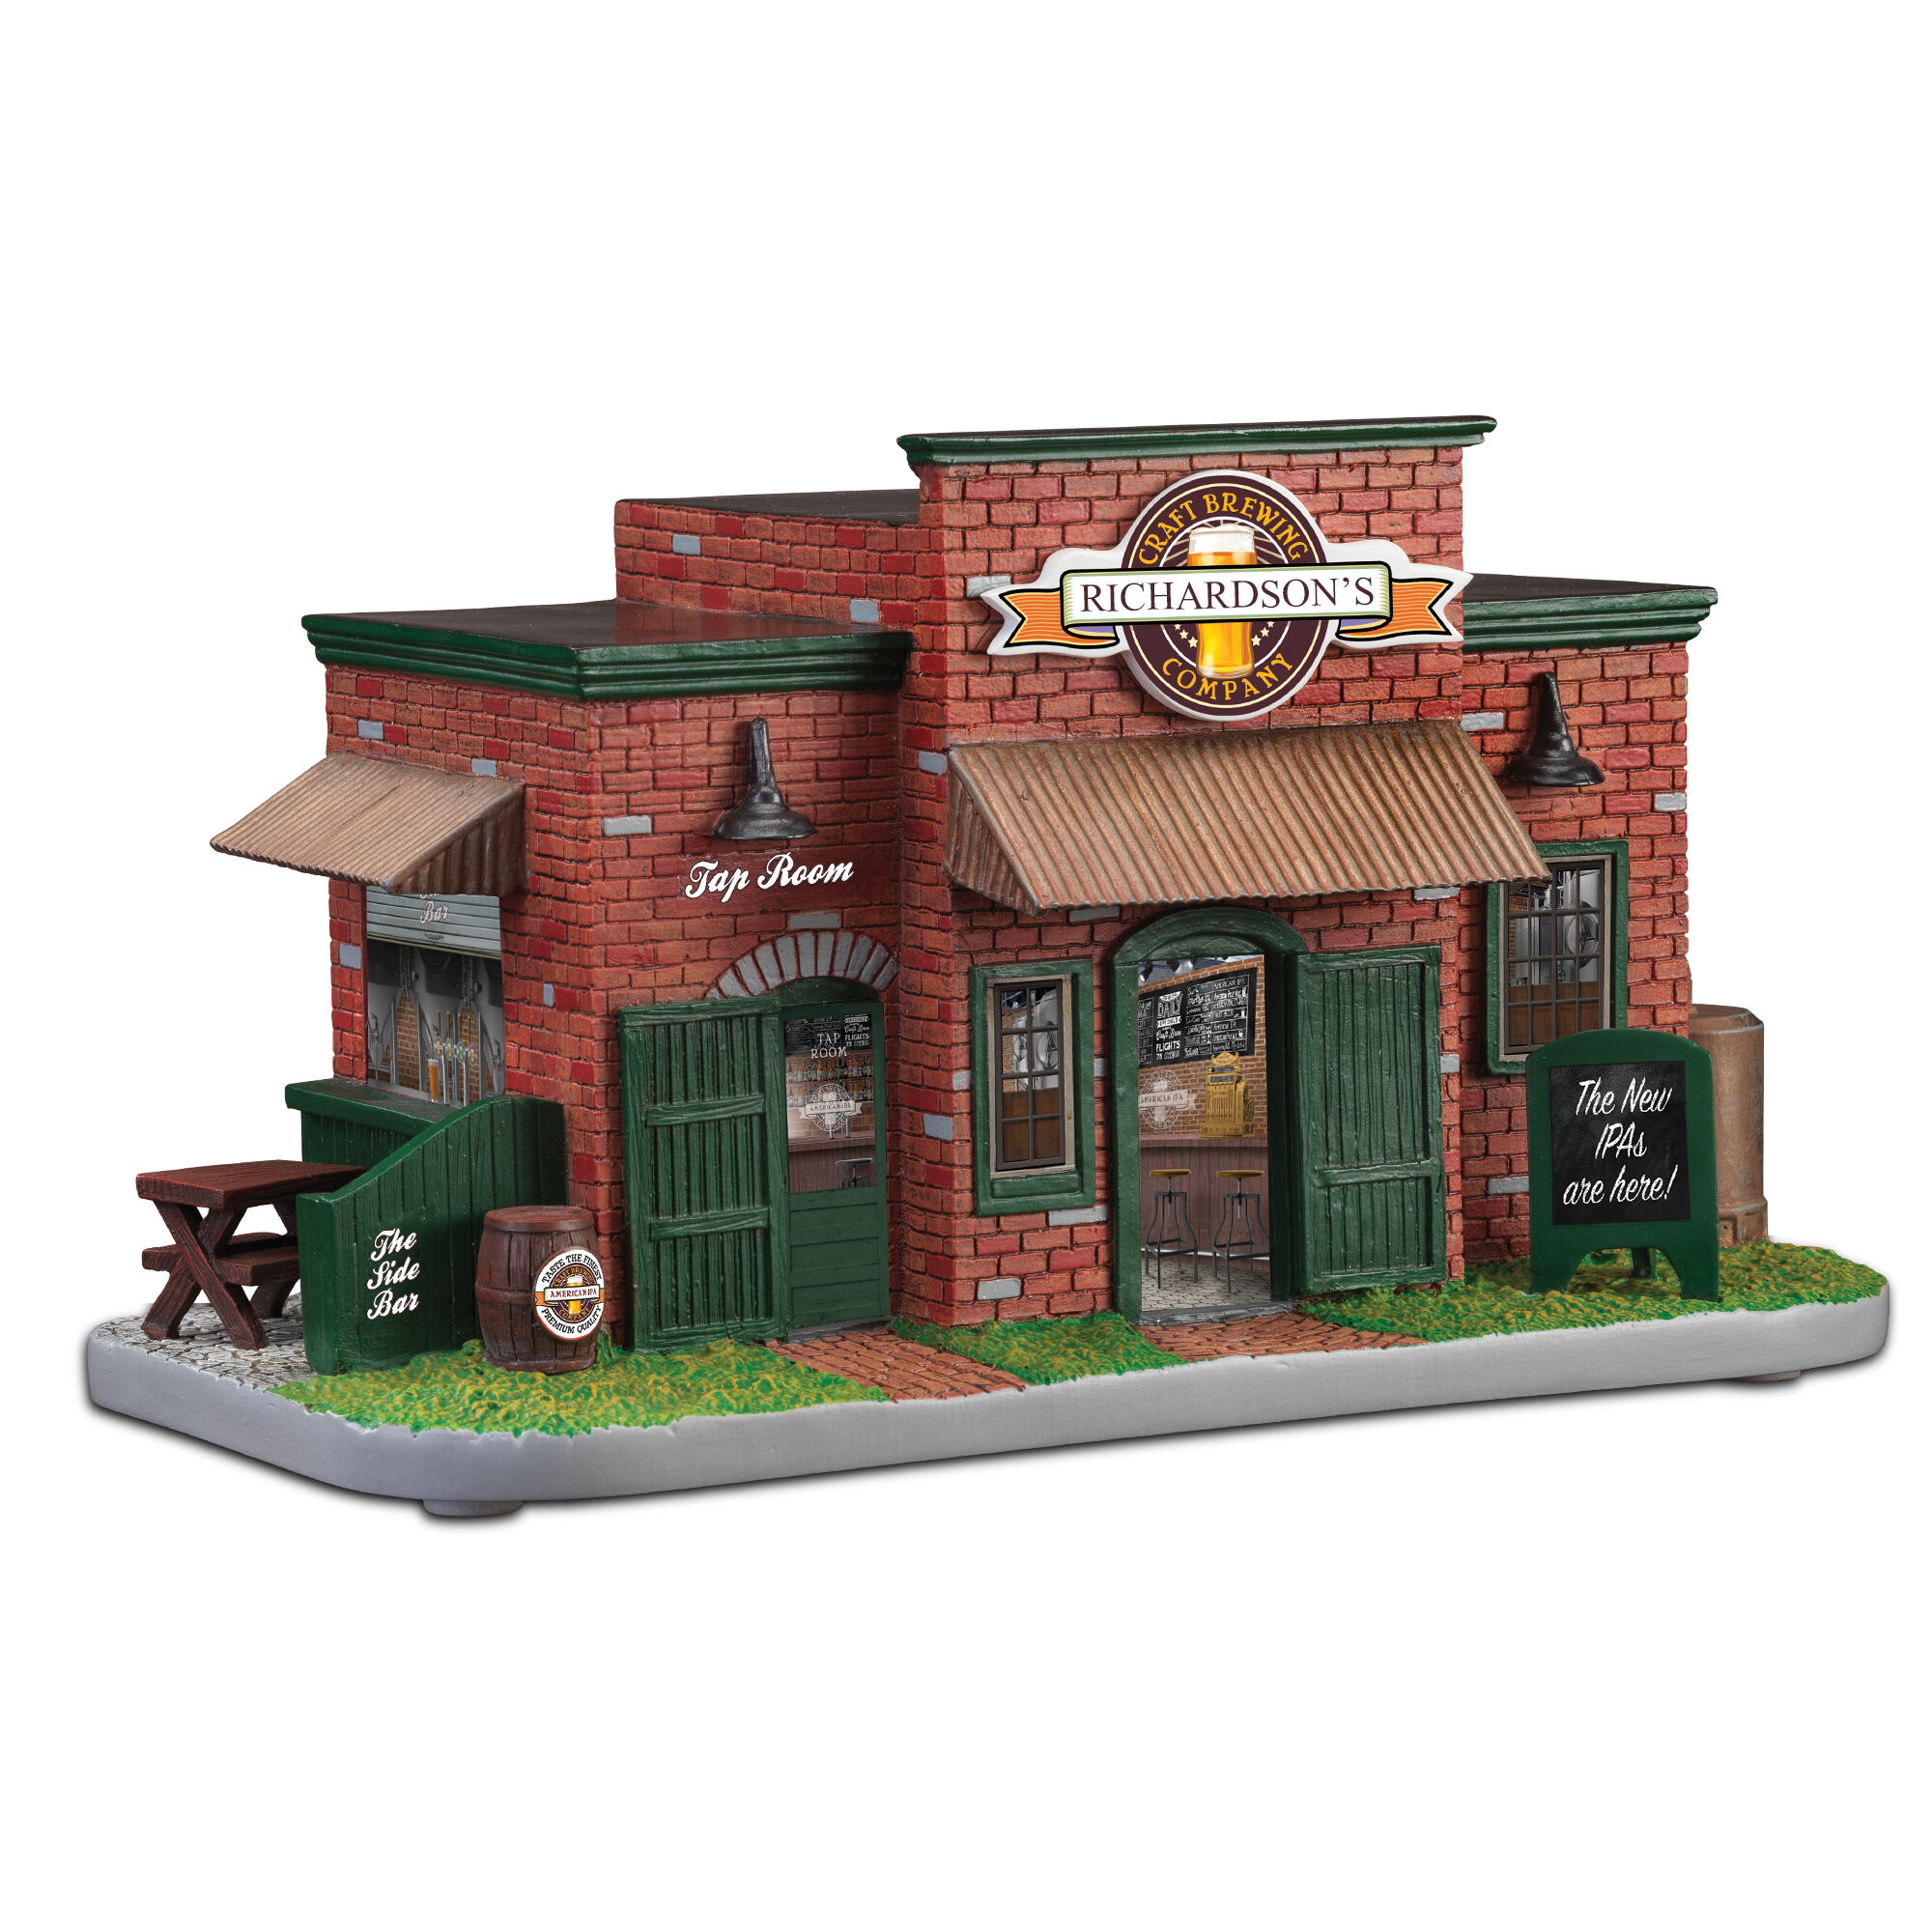 Personalized Brewery Sculpture 1128 0062 a main